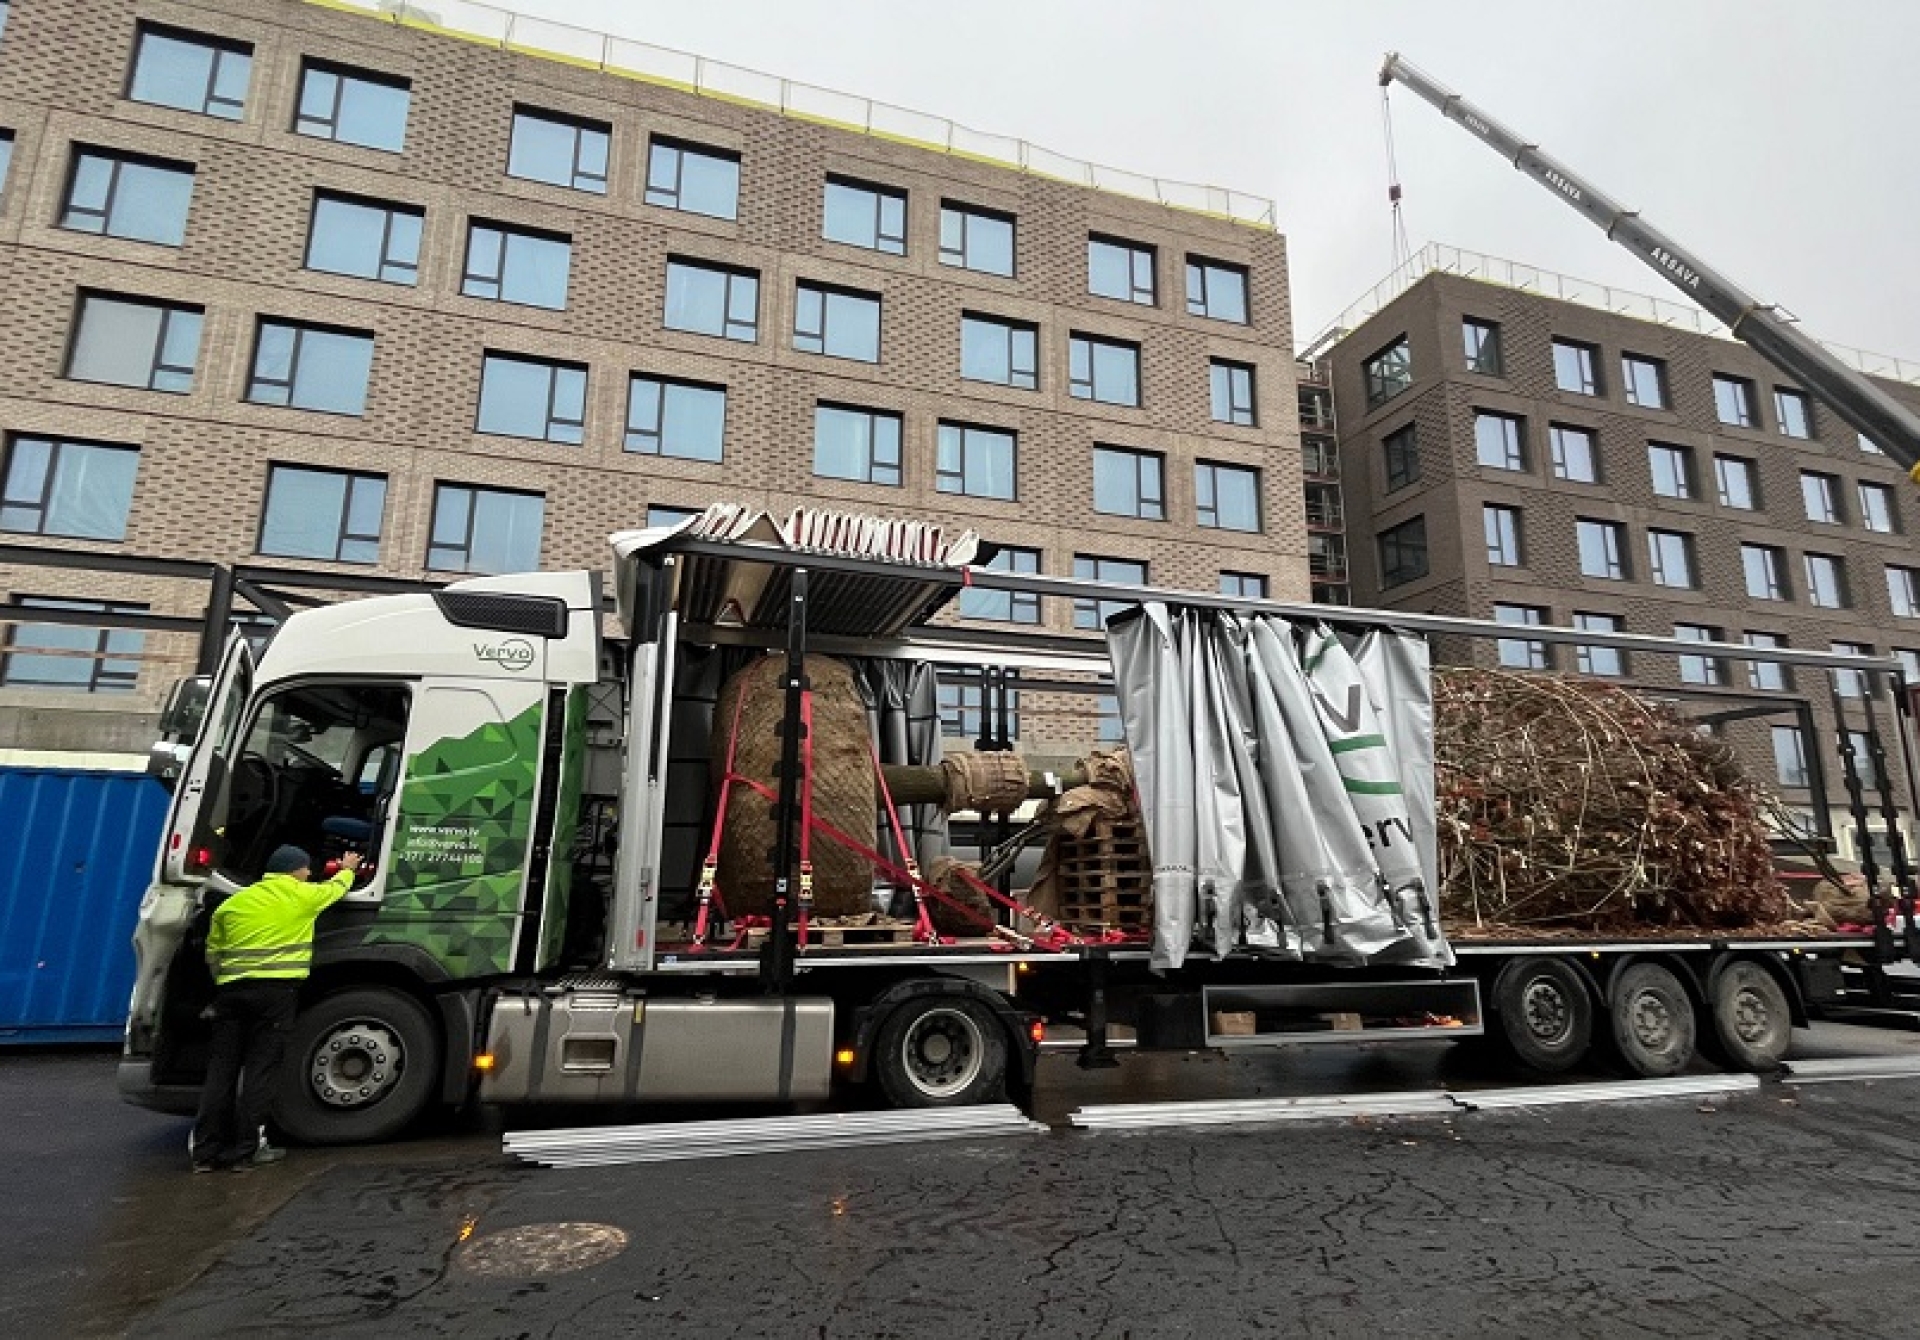 Delivery of a large oak tree for the territory's improvement